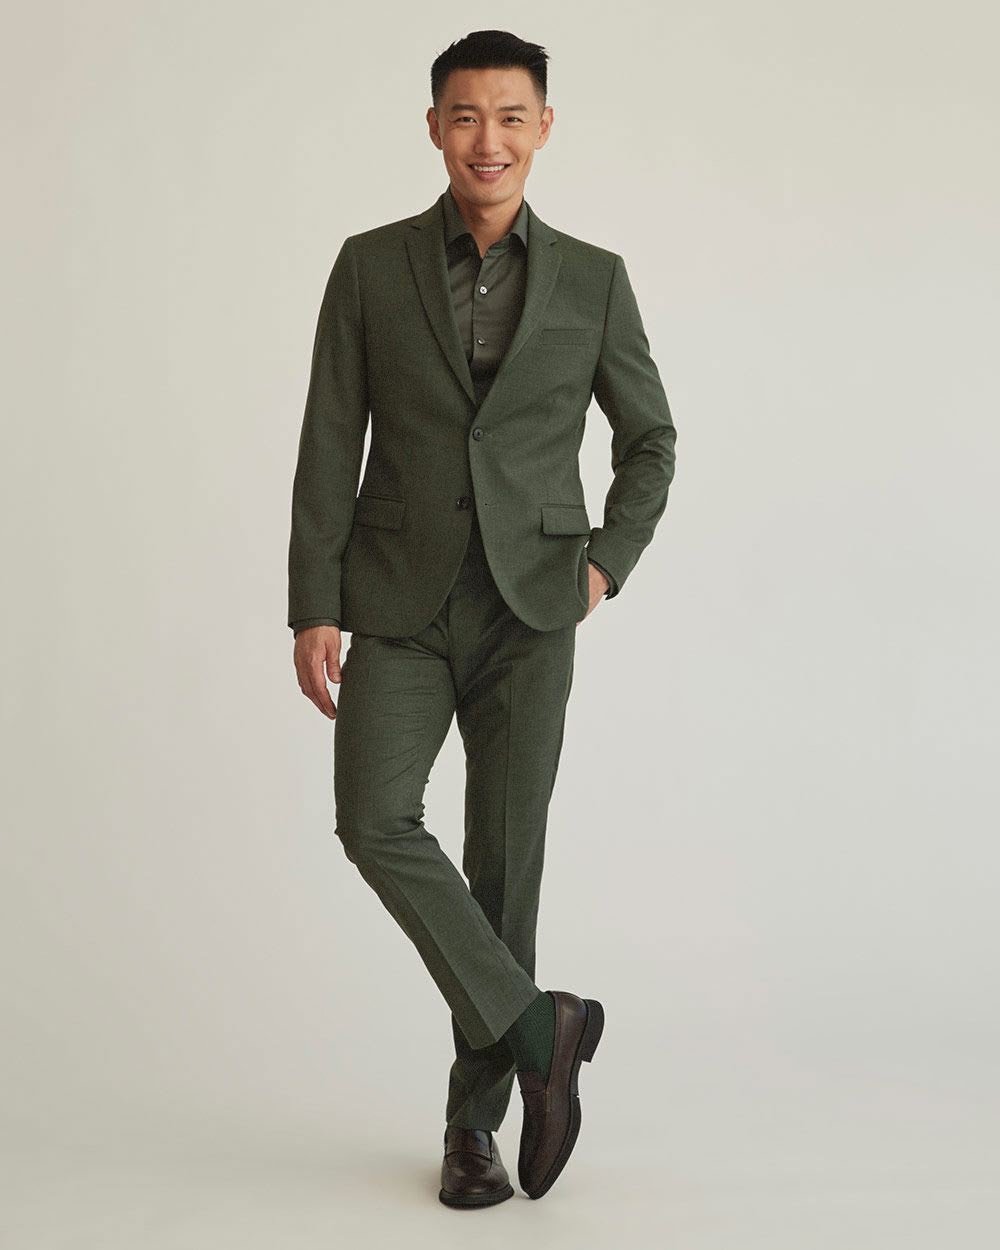 EXAMPLE COLOURED SUIT